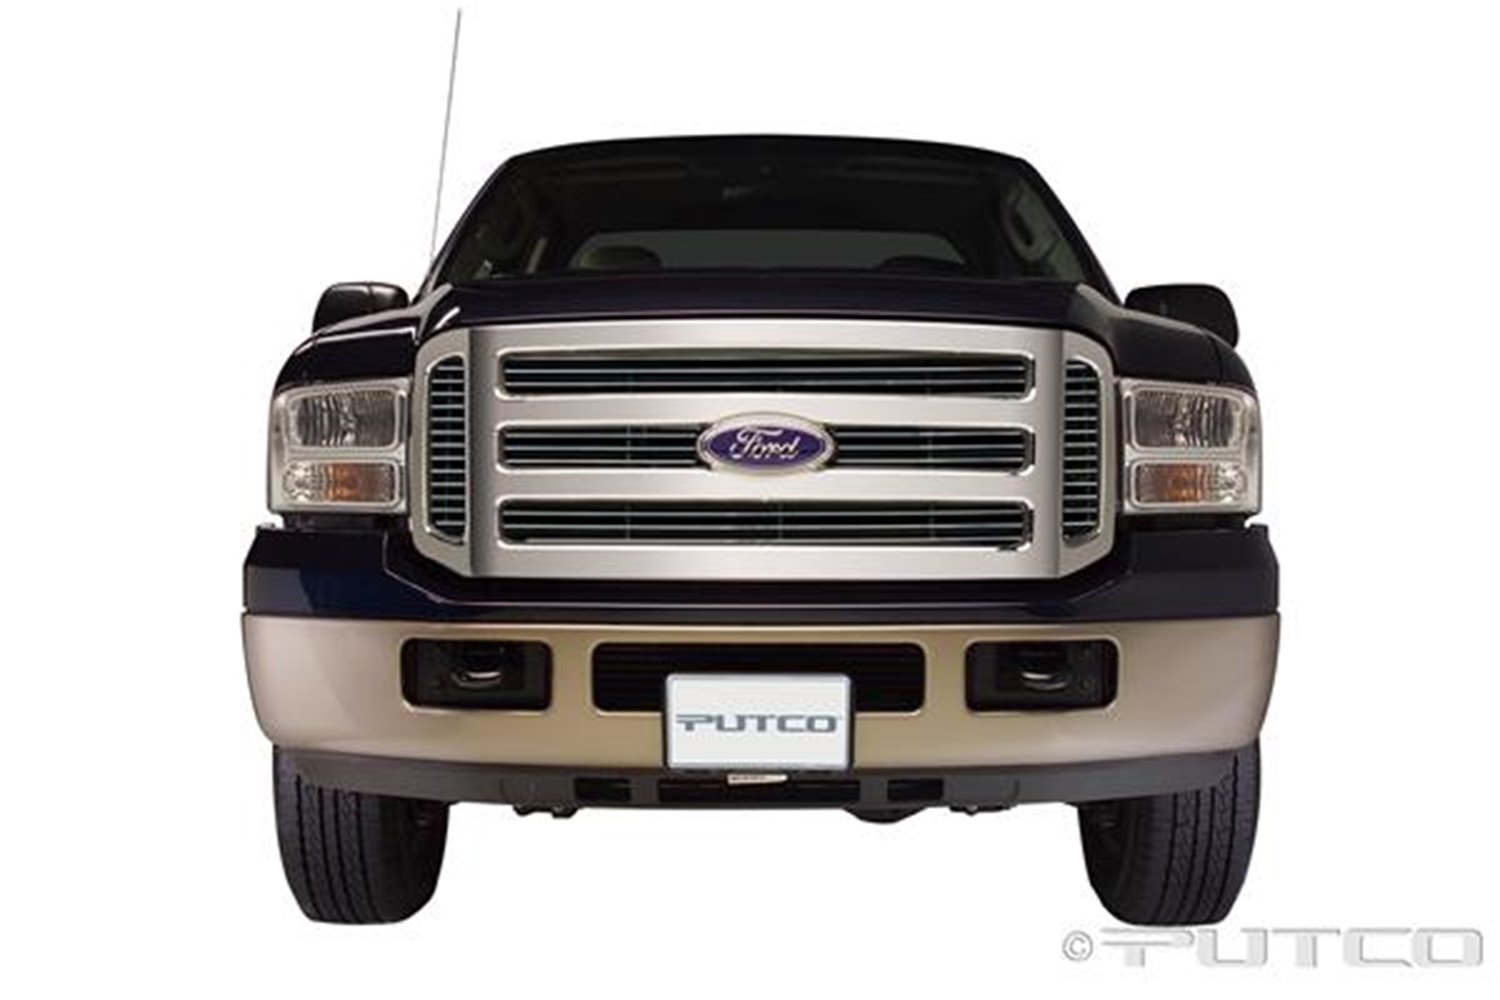 Shadow Series Billet Grille 2005-07 Ford F-Series Super Duty